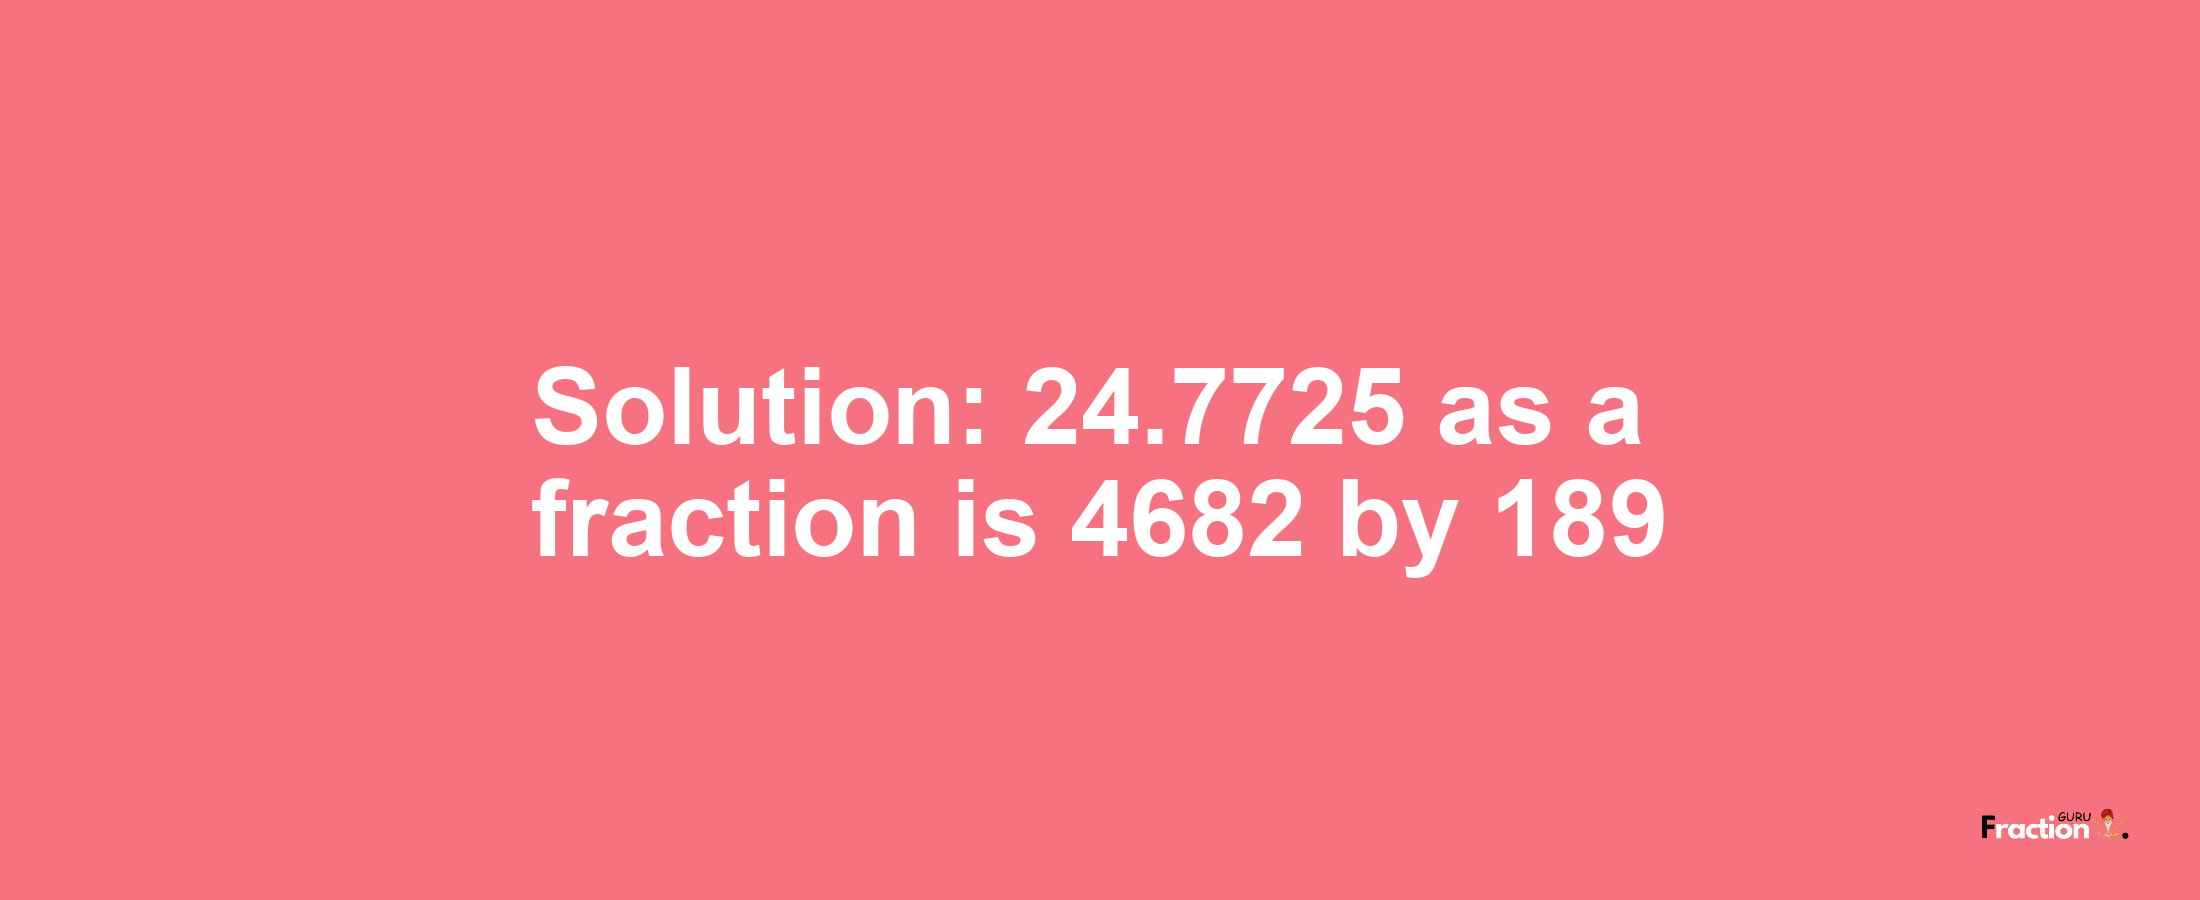 Solution:24.7725 as a fraction is 4682/189